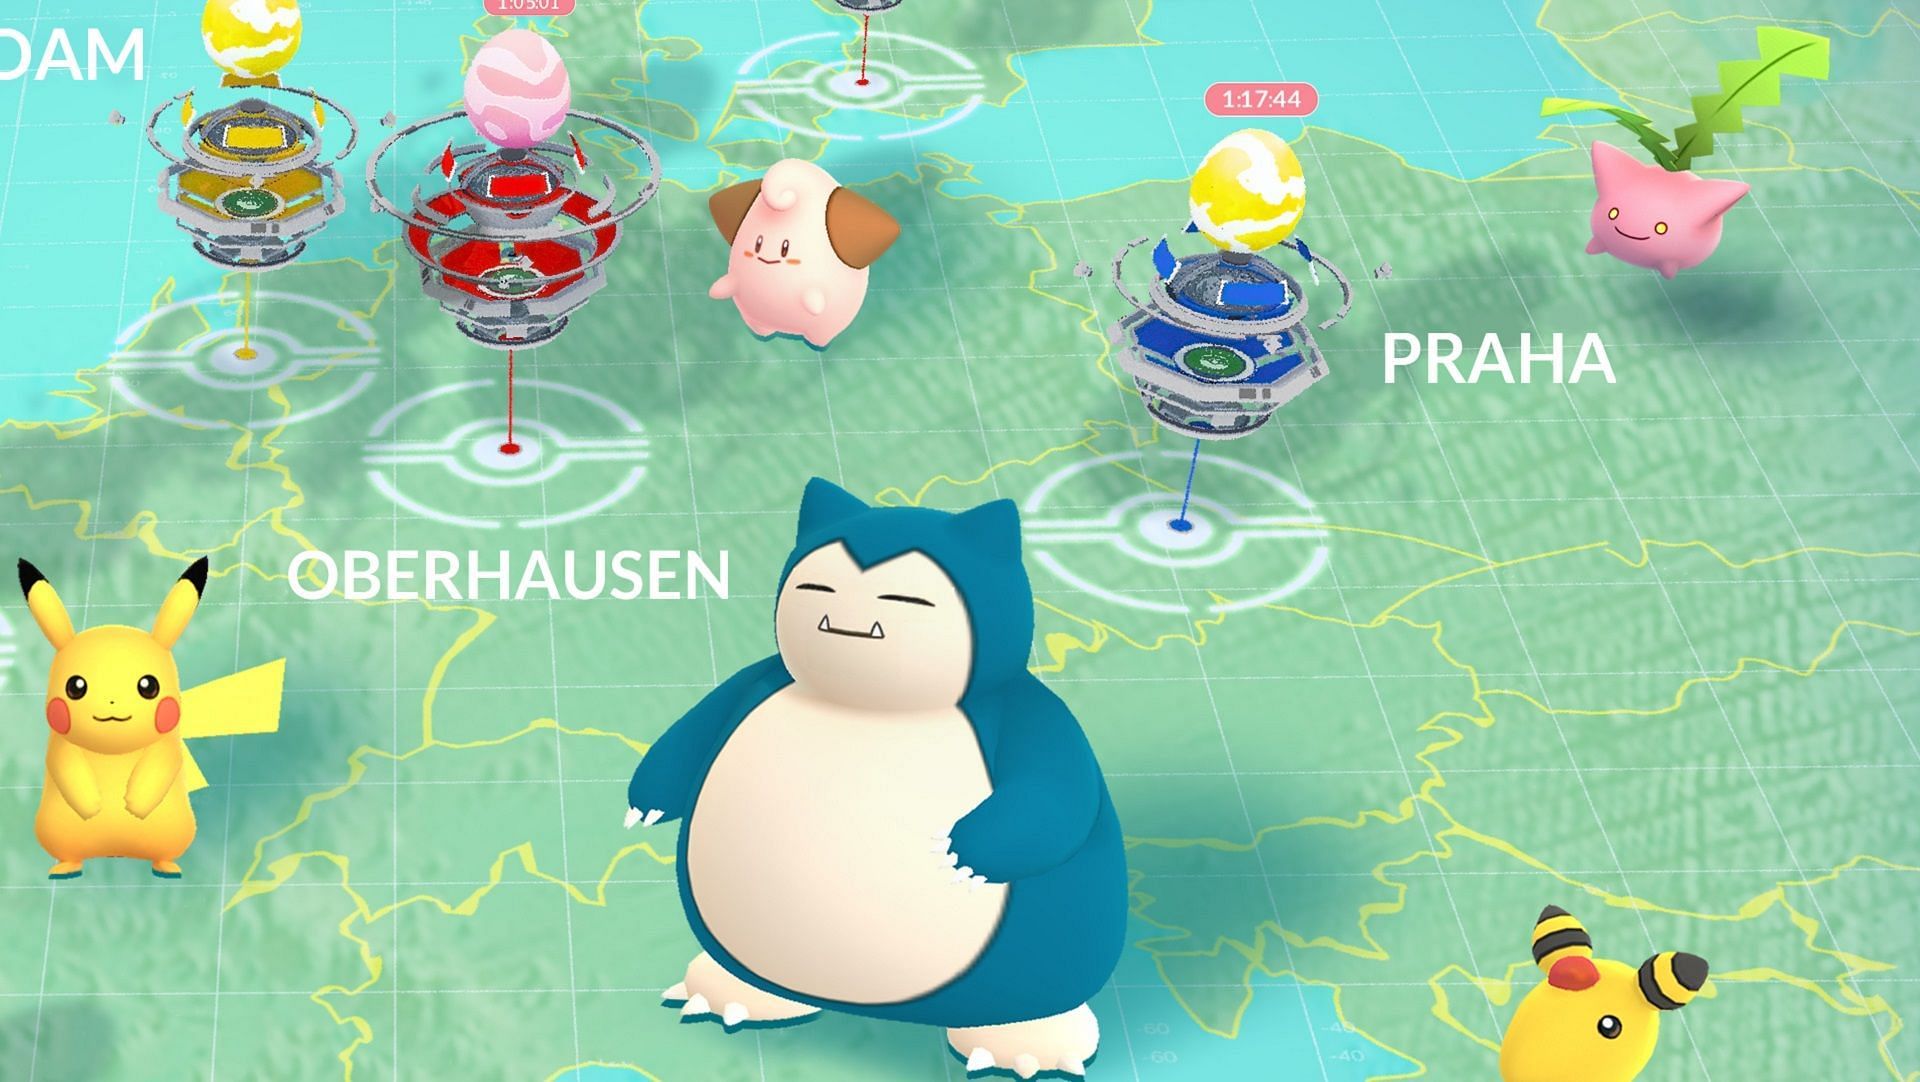 Pokemon GO is accessible in many countries, but prohibited in some (Image via Niantic)